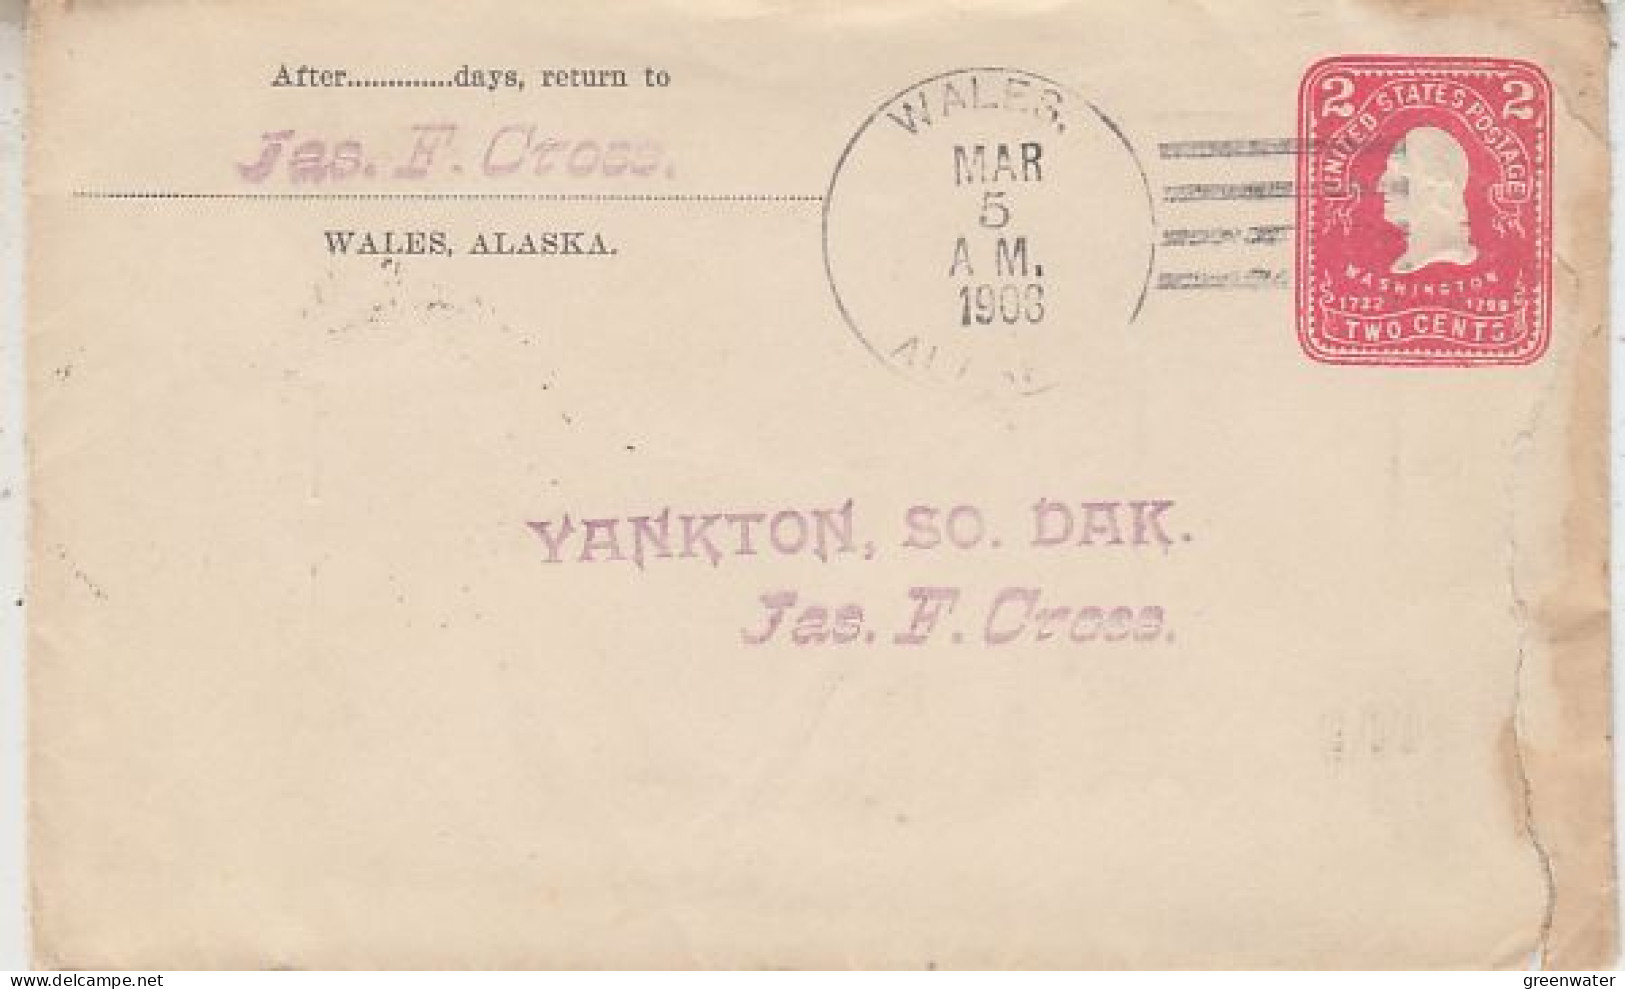 Alaska / Yukon 5 winter mail covers being transported in parts by Dog Sled (59862)